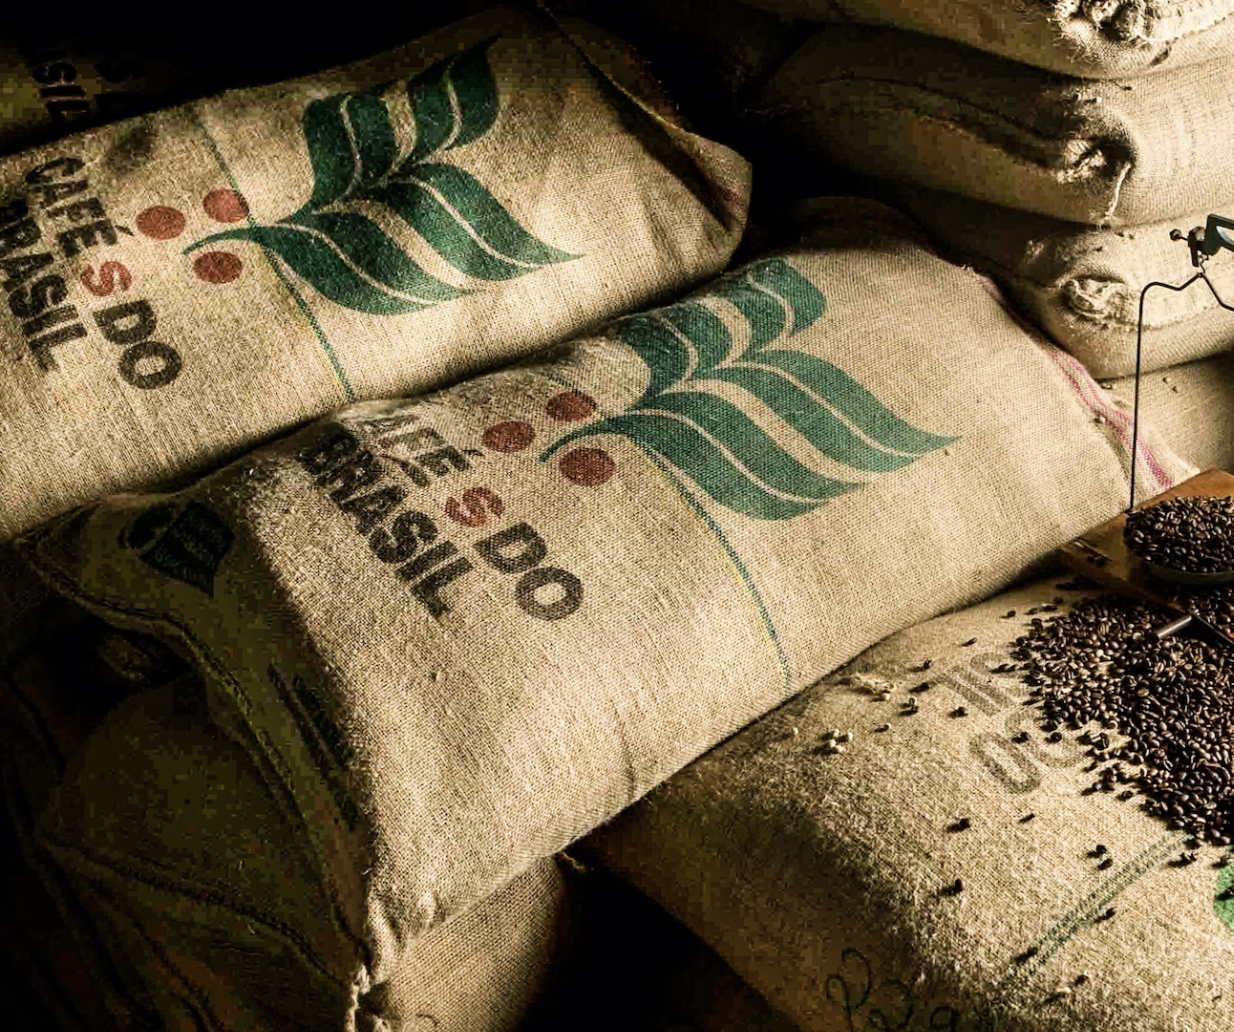 Brazilian coffee beans in sacks for exporting